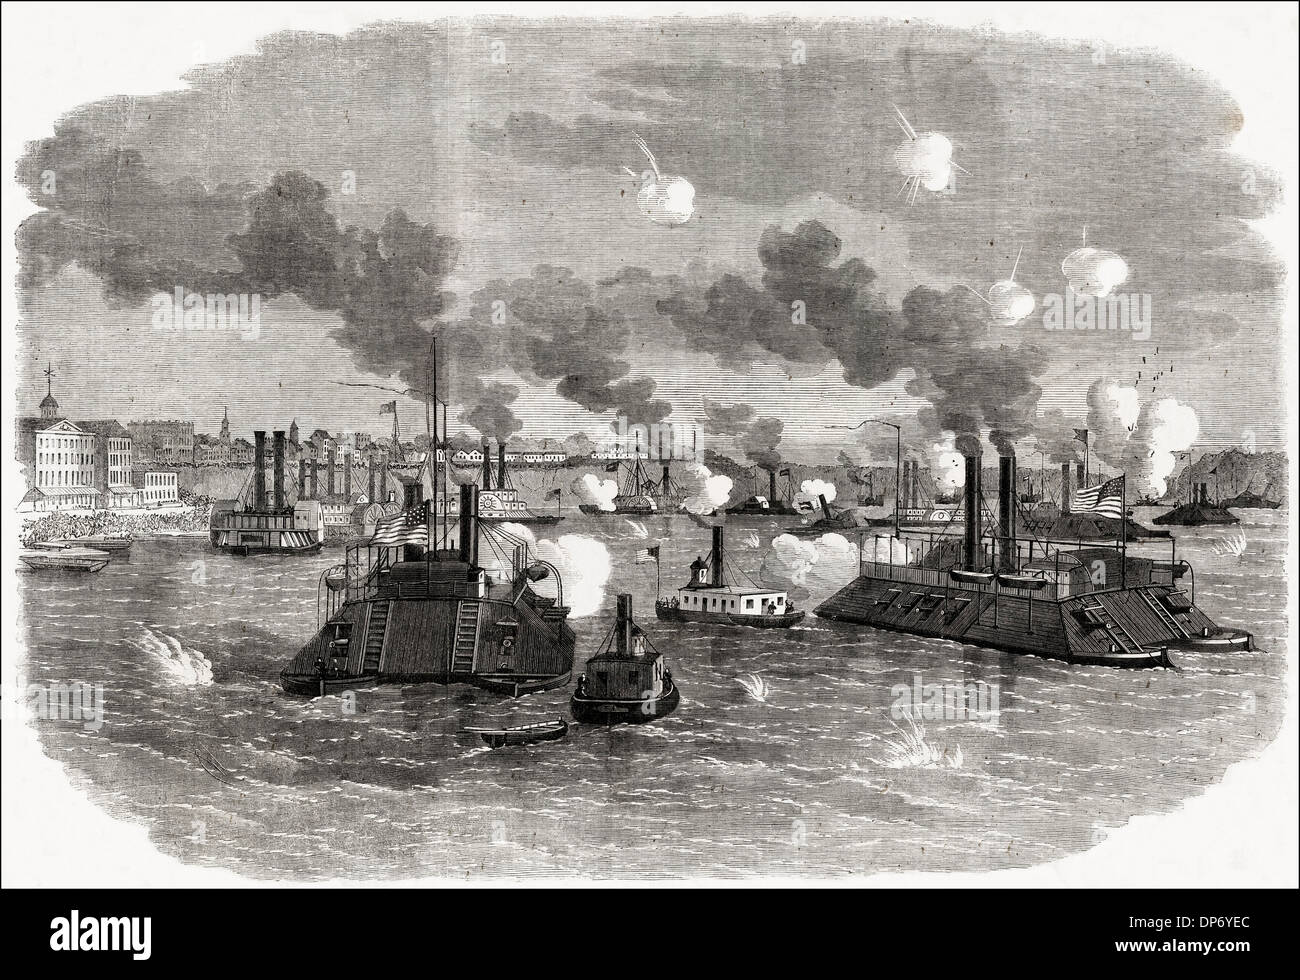 American Civil War 1861 - 1865 Destruction of the Confederate flotilla on the Mississippi River off Memphis Tennessee US. Victorian woodcut engraving circa 1862 Stock Photo